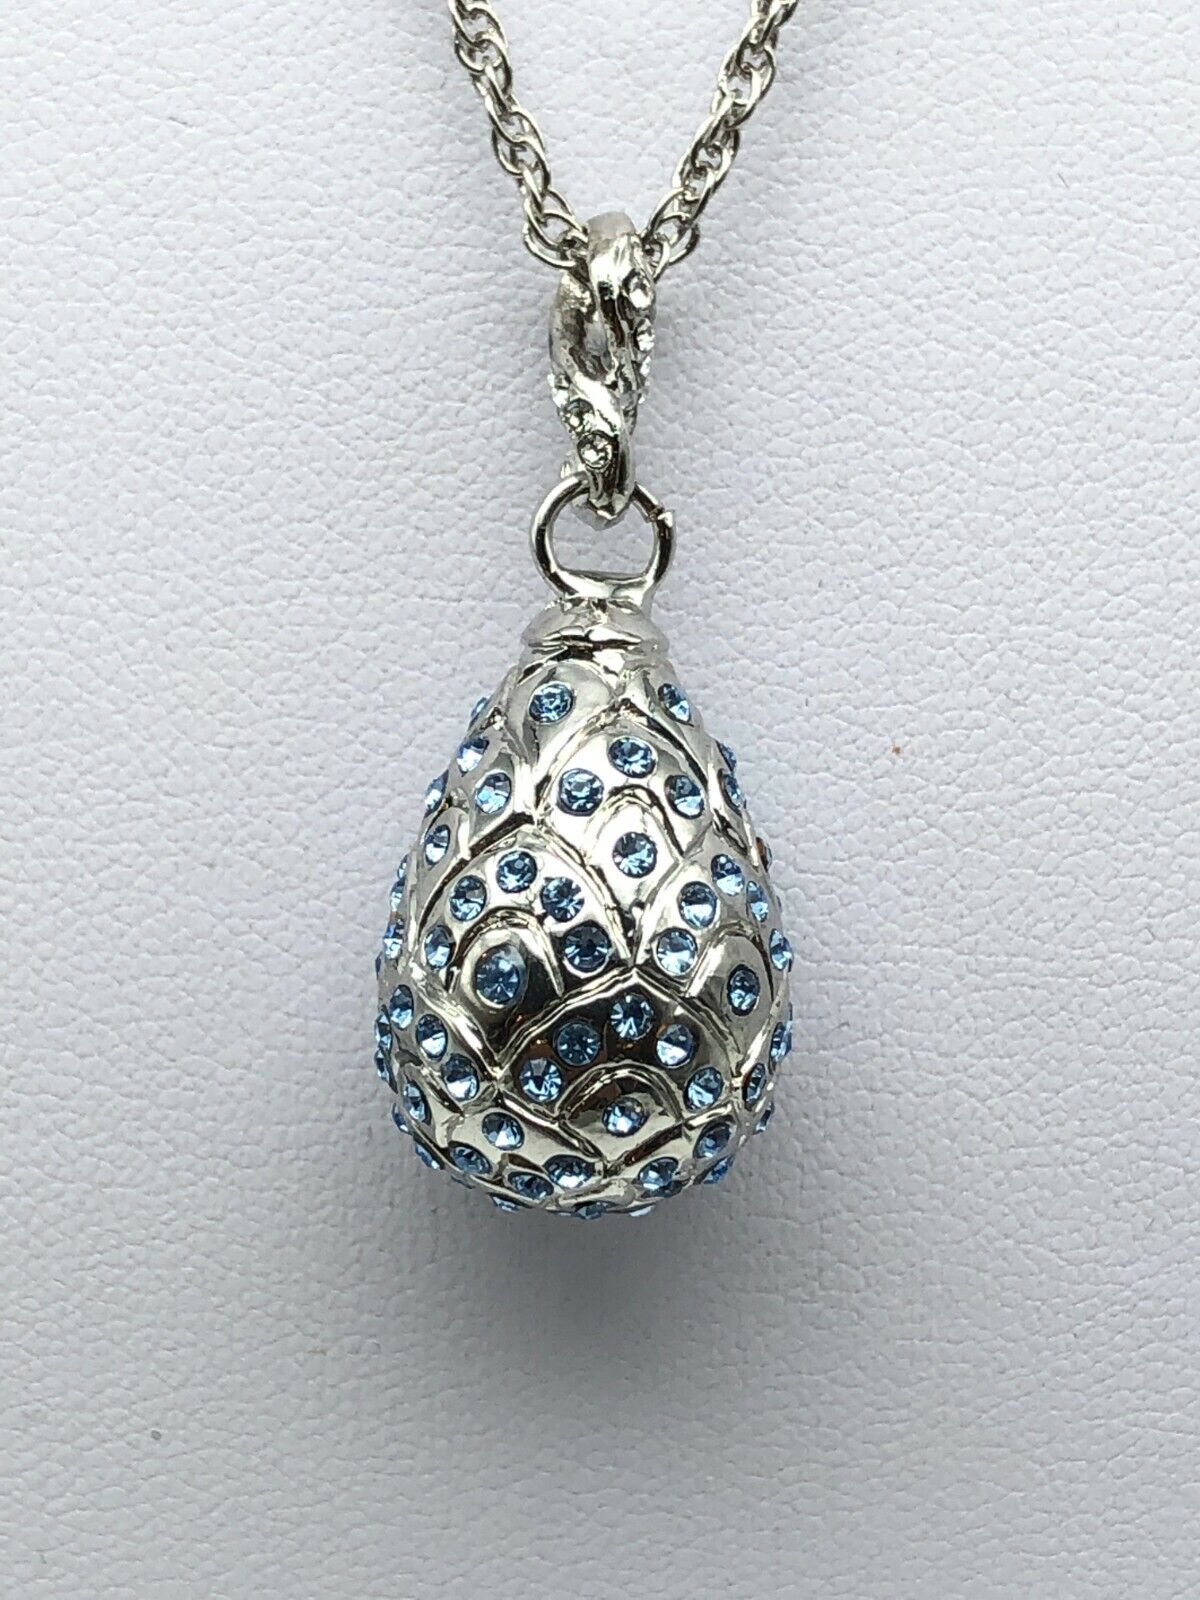 Silver and blue Egg Pendant Necklace with crystals by Keren Kopal